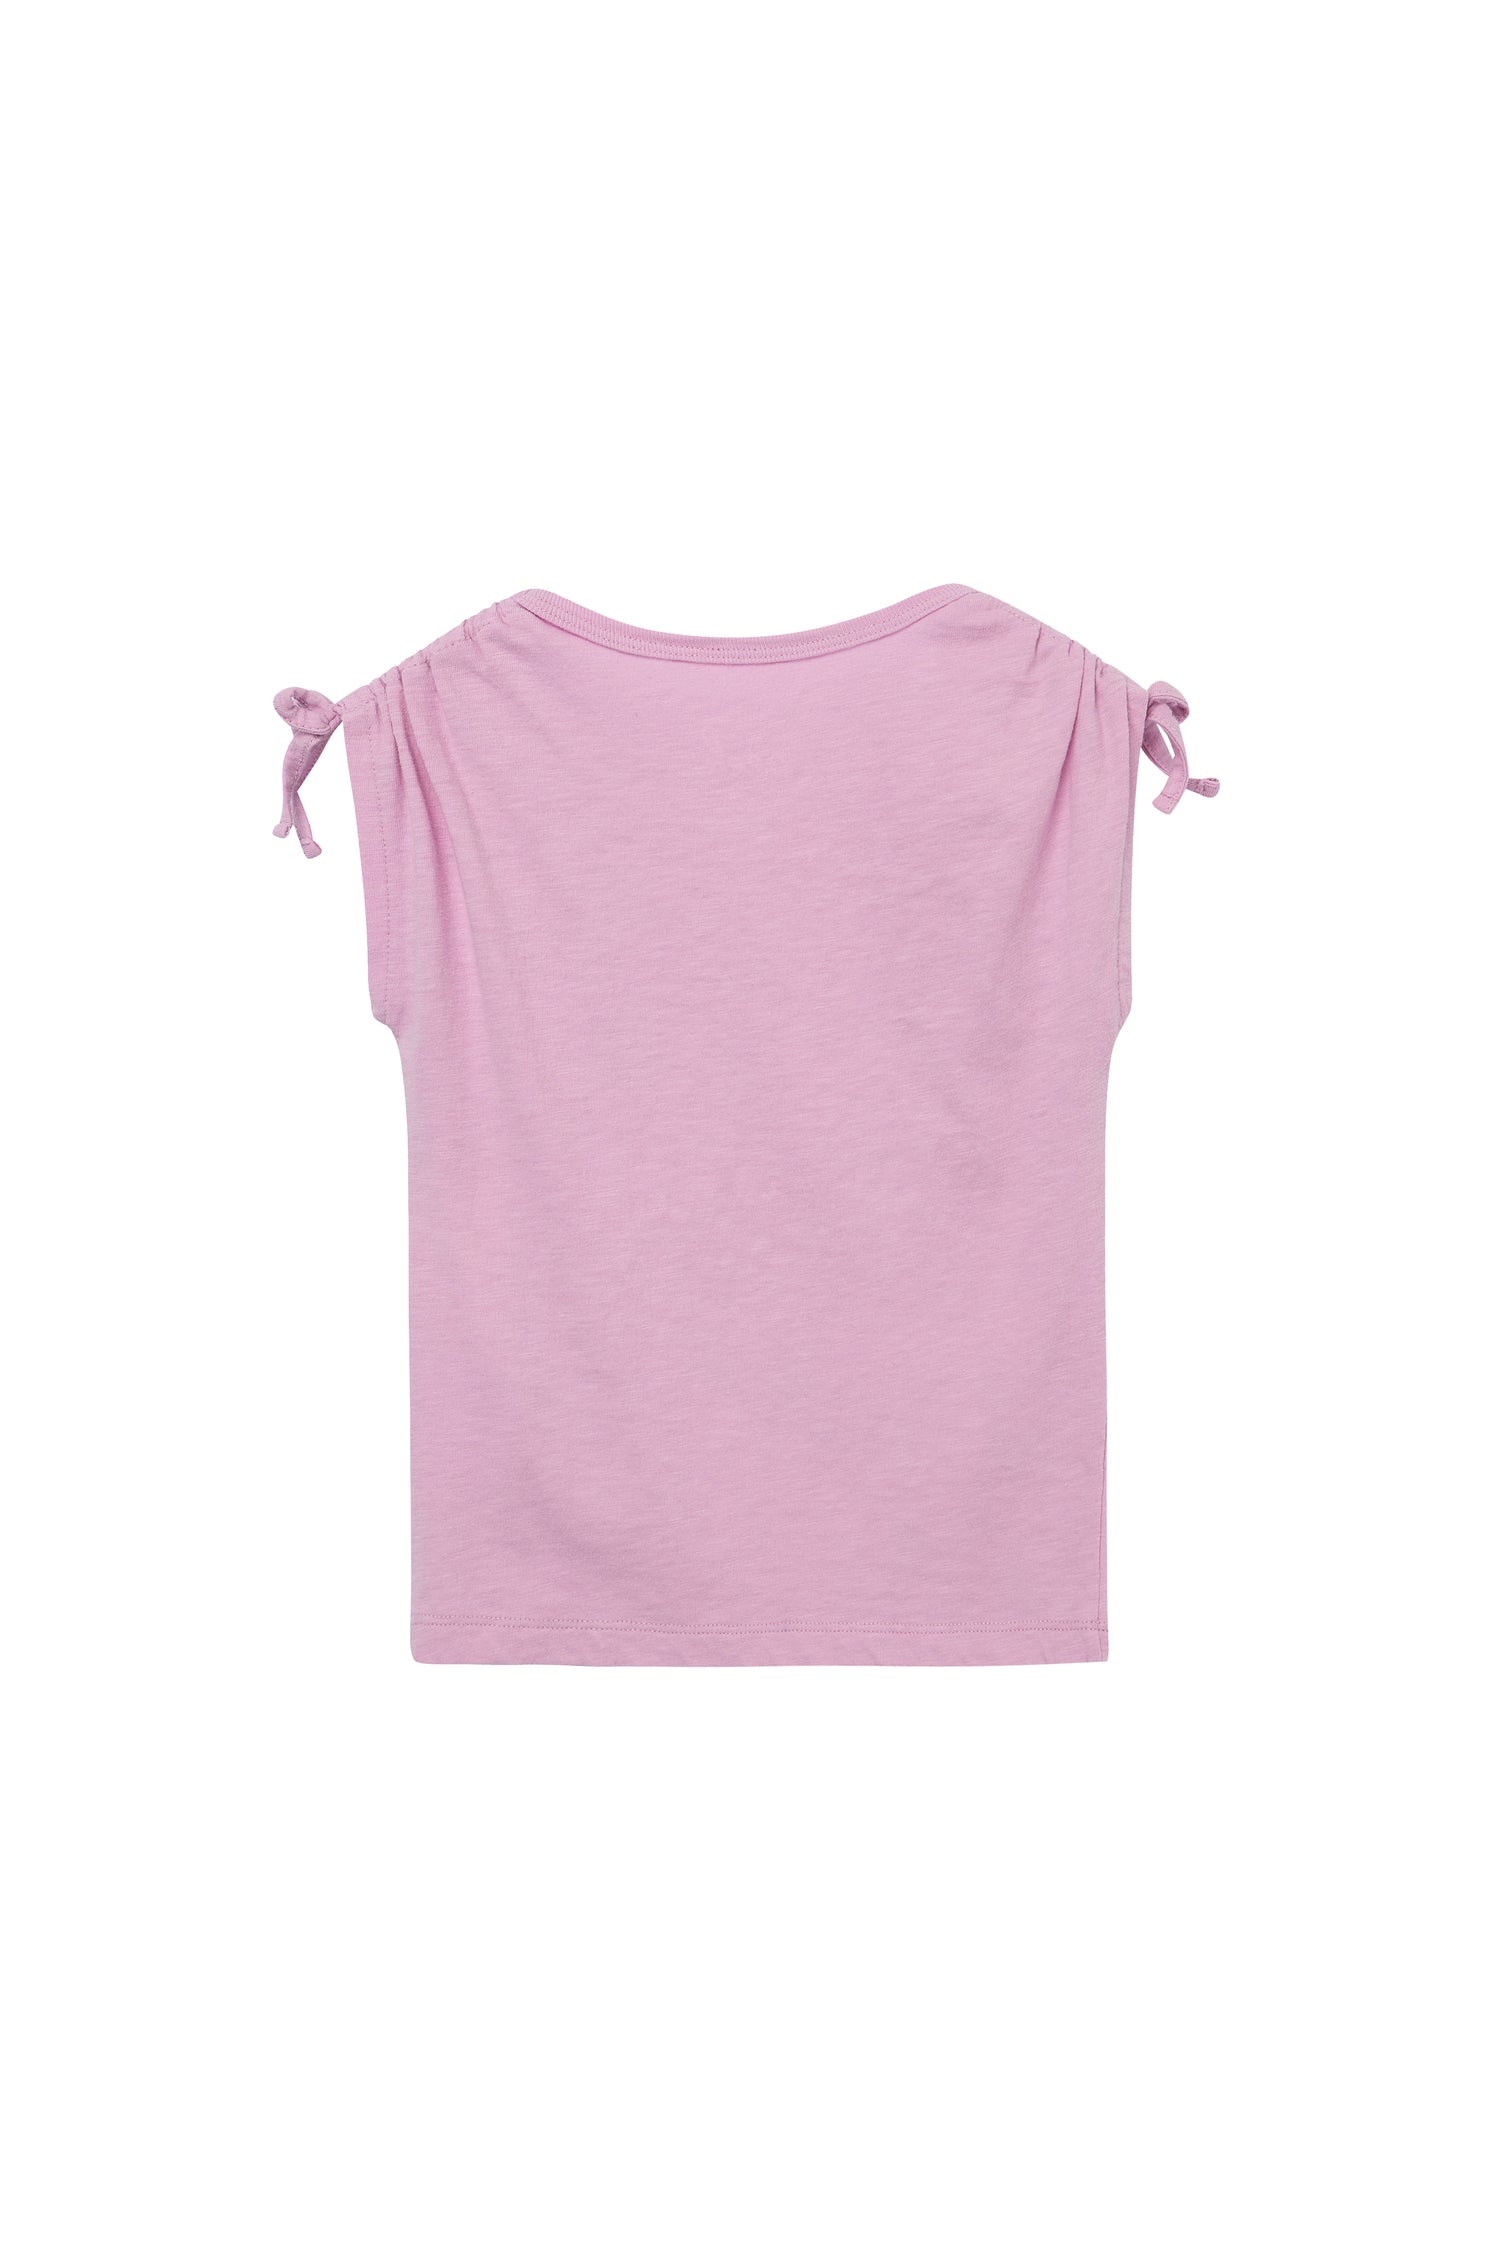 BACK OF PINK SHORT-SLEEVE TOP